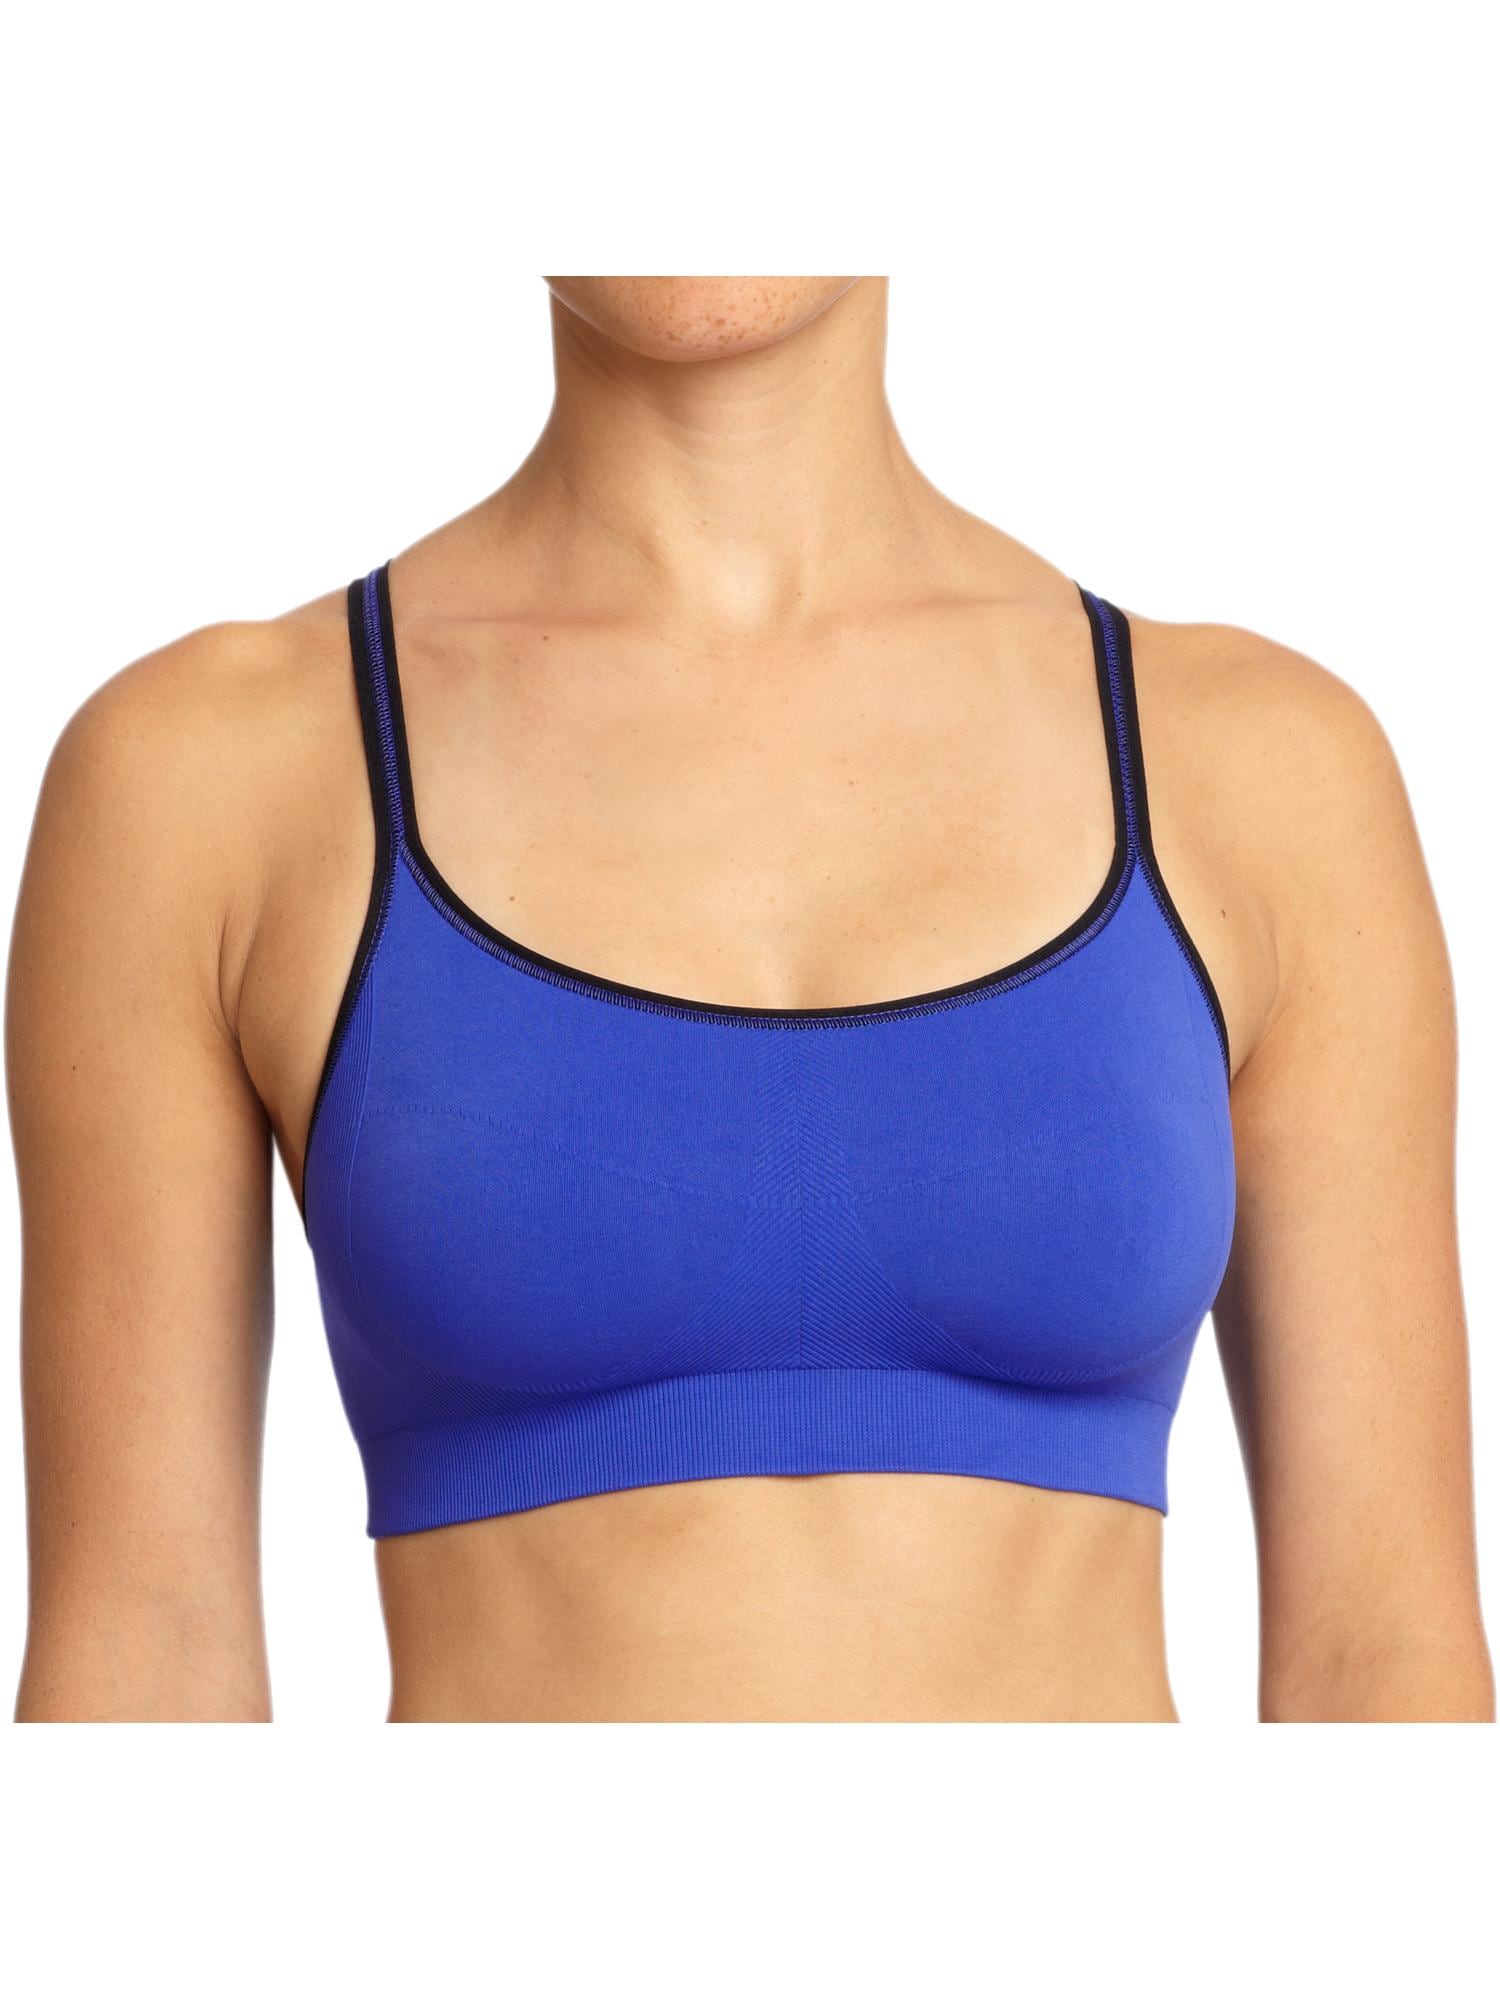 Stow And Go Sports Bra - Classic Navy - FINAL SALE - ShopperBoard